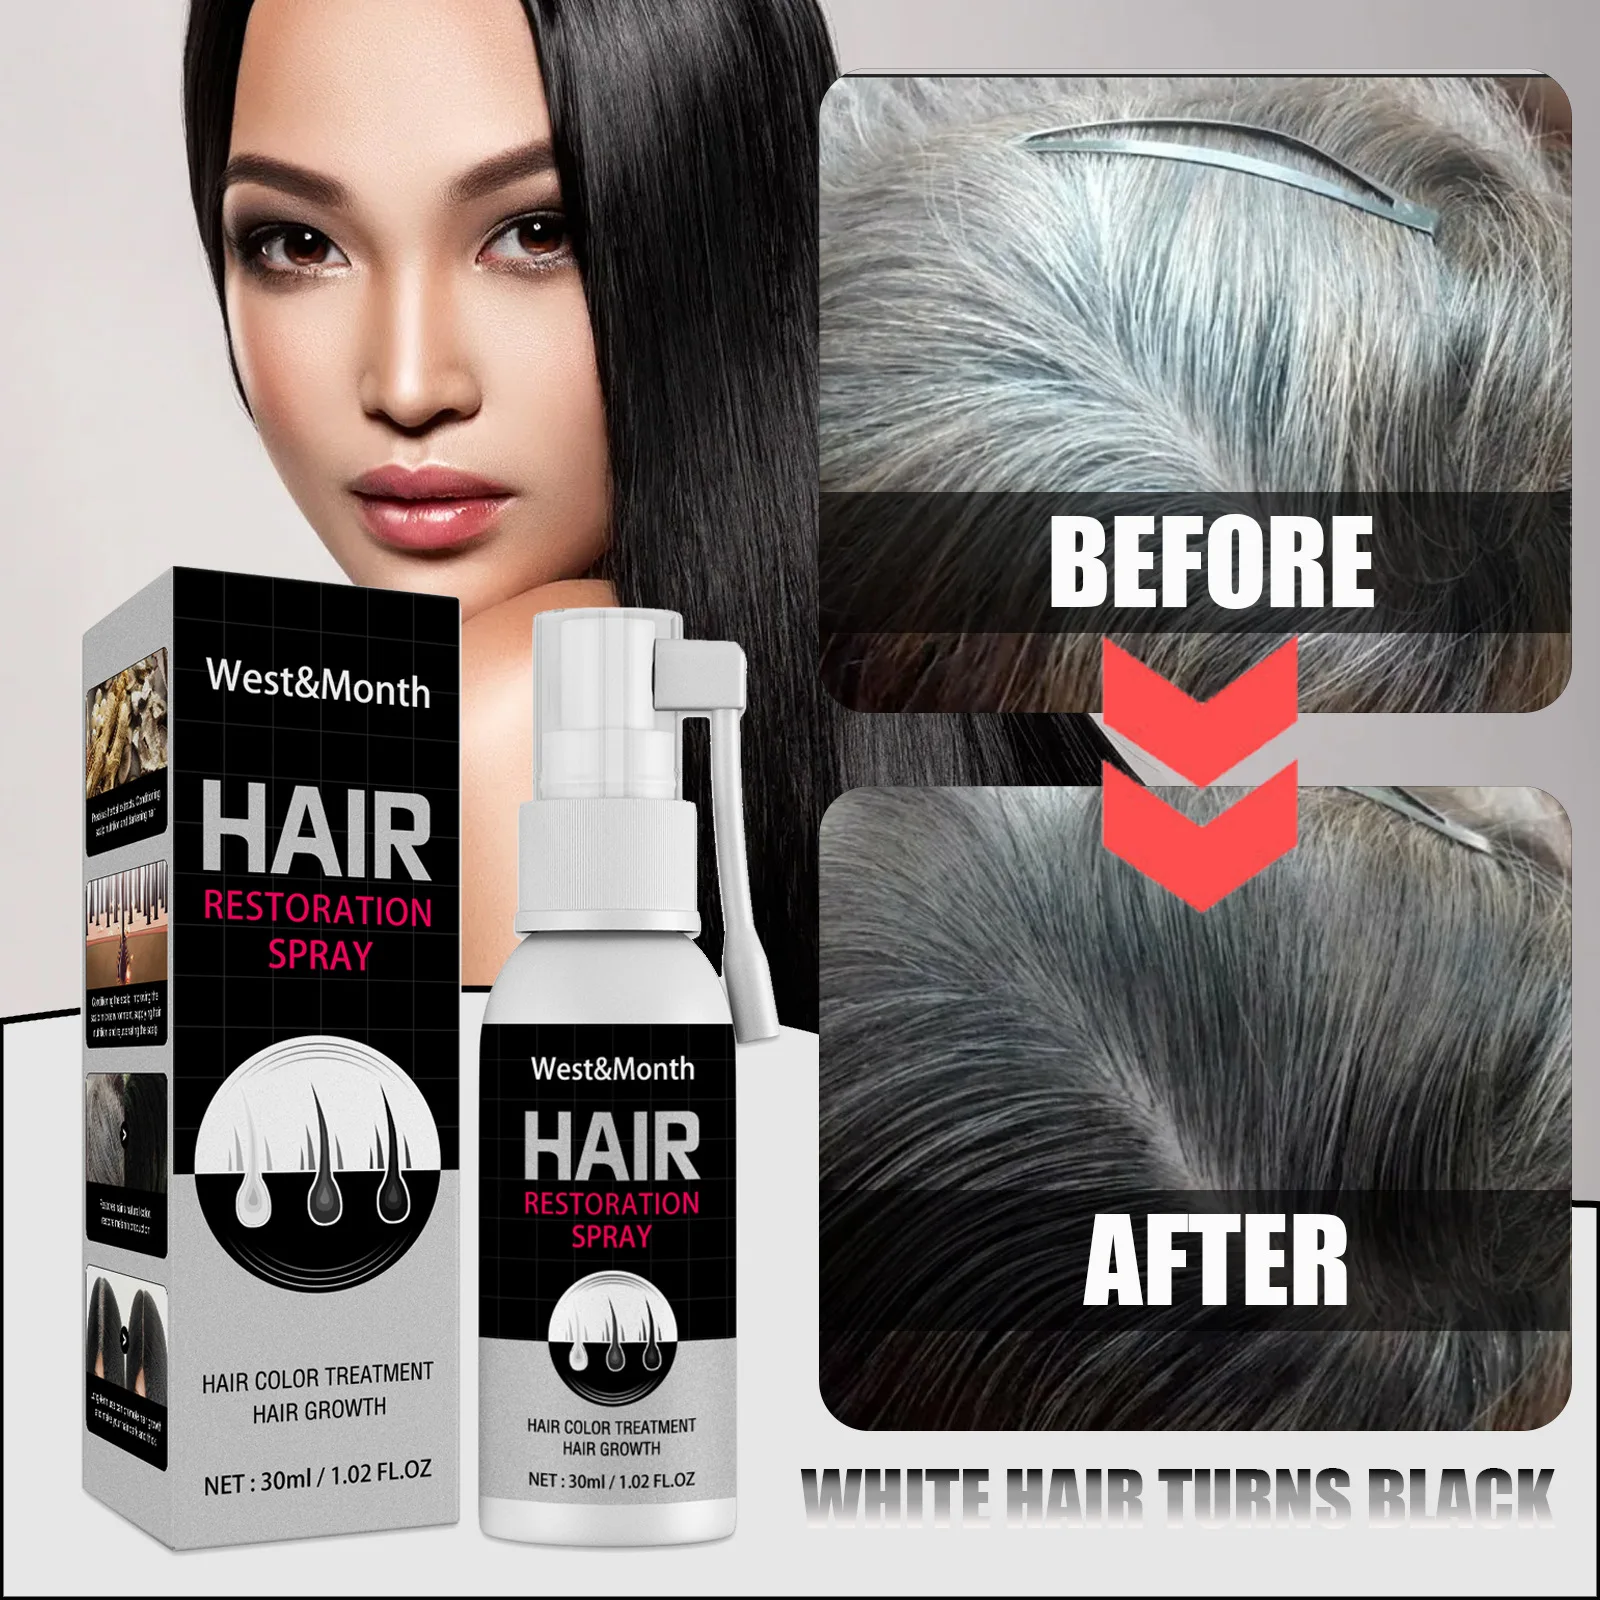 

Herbal Black Hair Growth Spray Serum Ginseng Anti-white Hair Treatment Loss Products Nourishes Scalp Prevent Hair Thinning Care